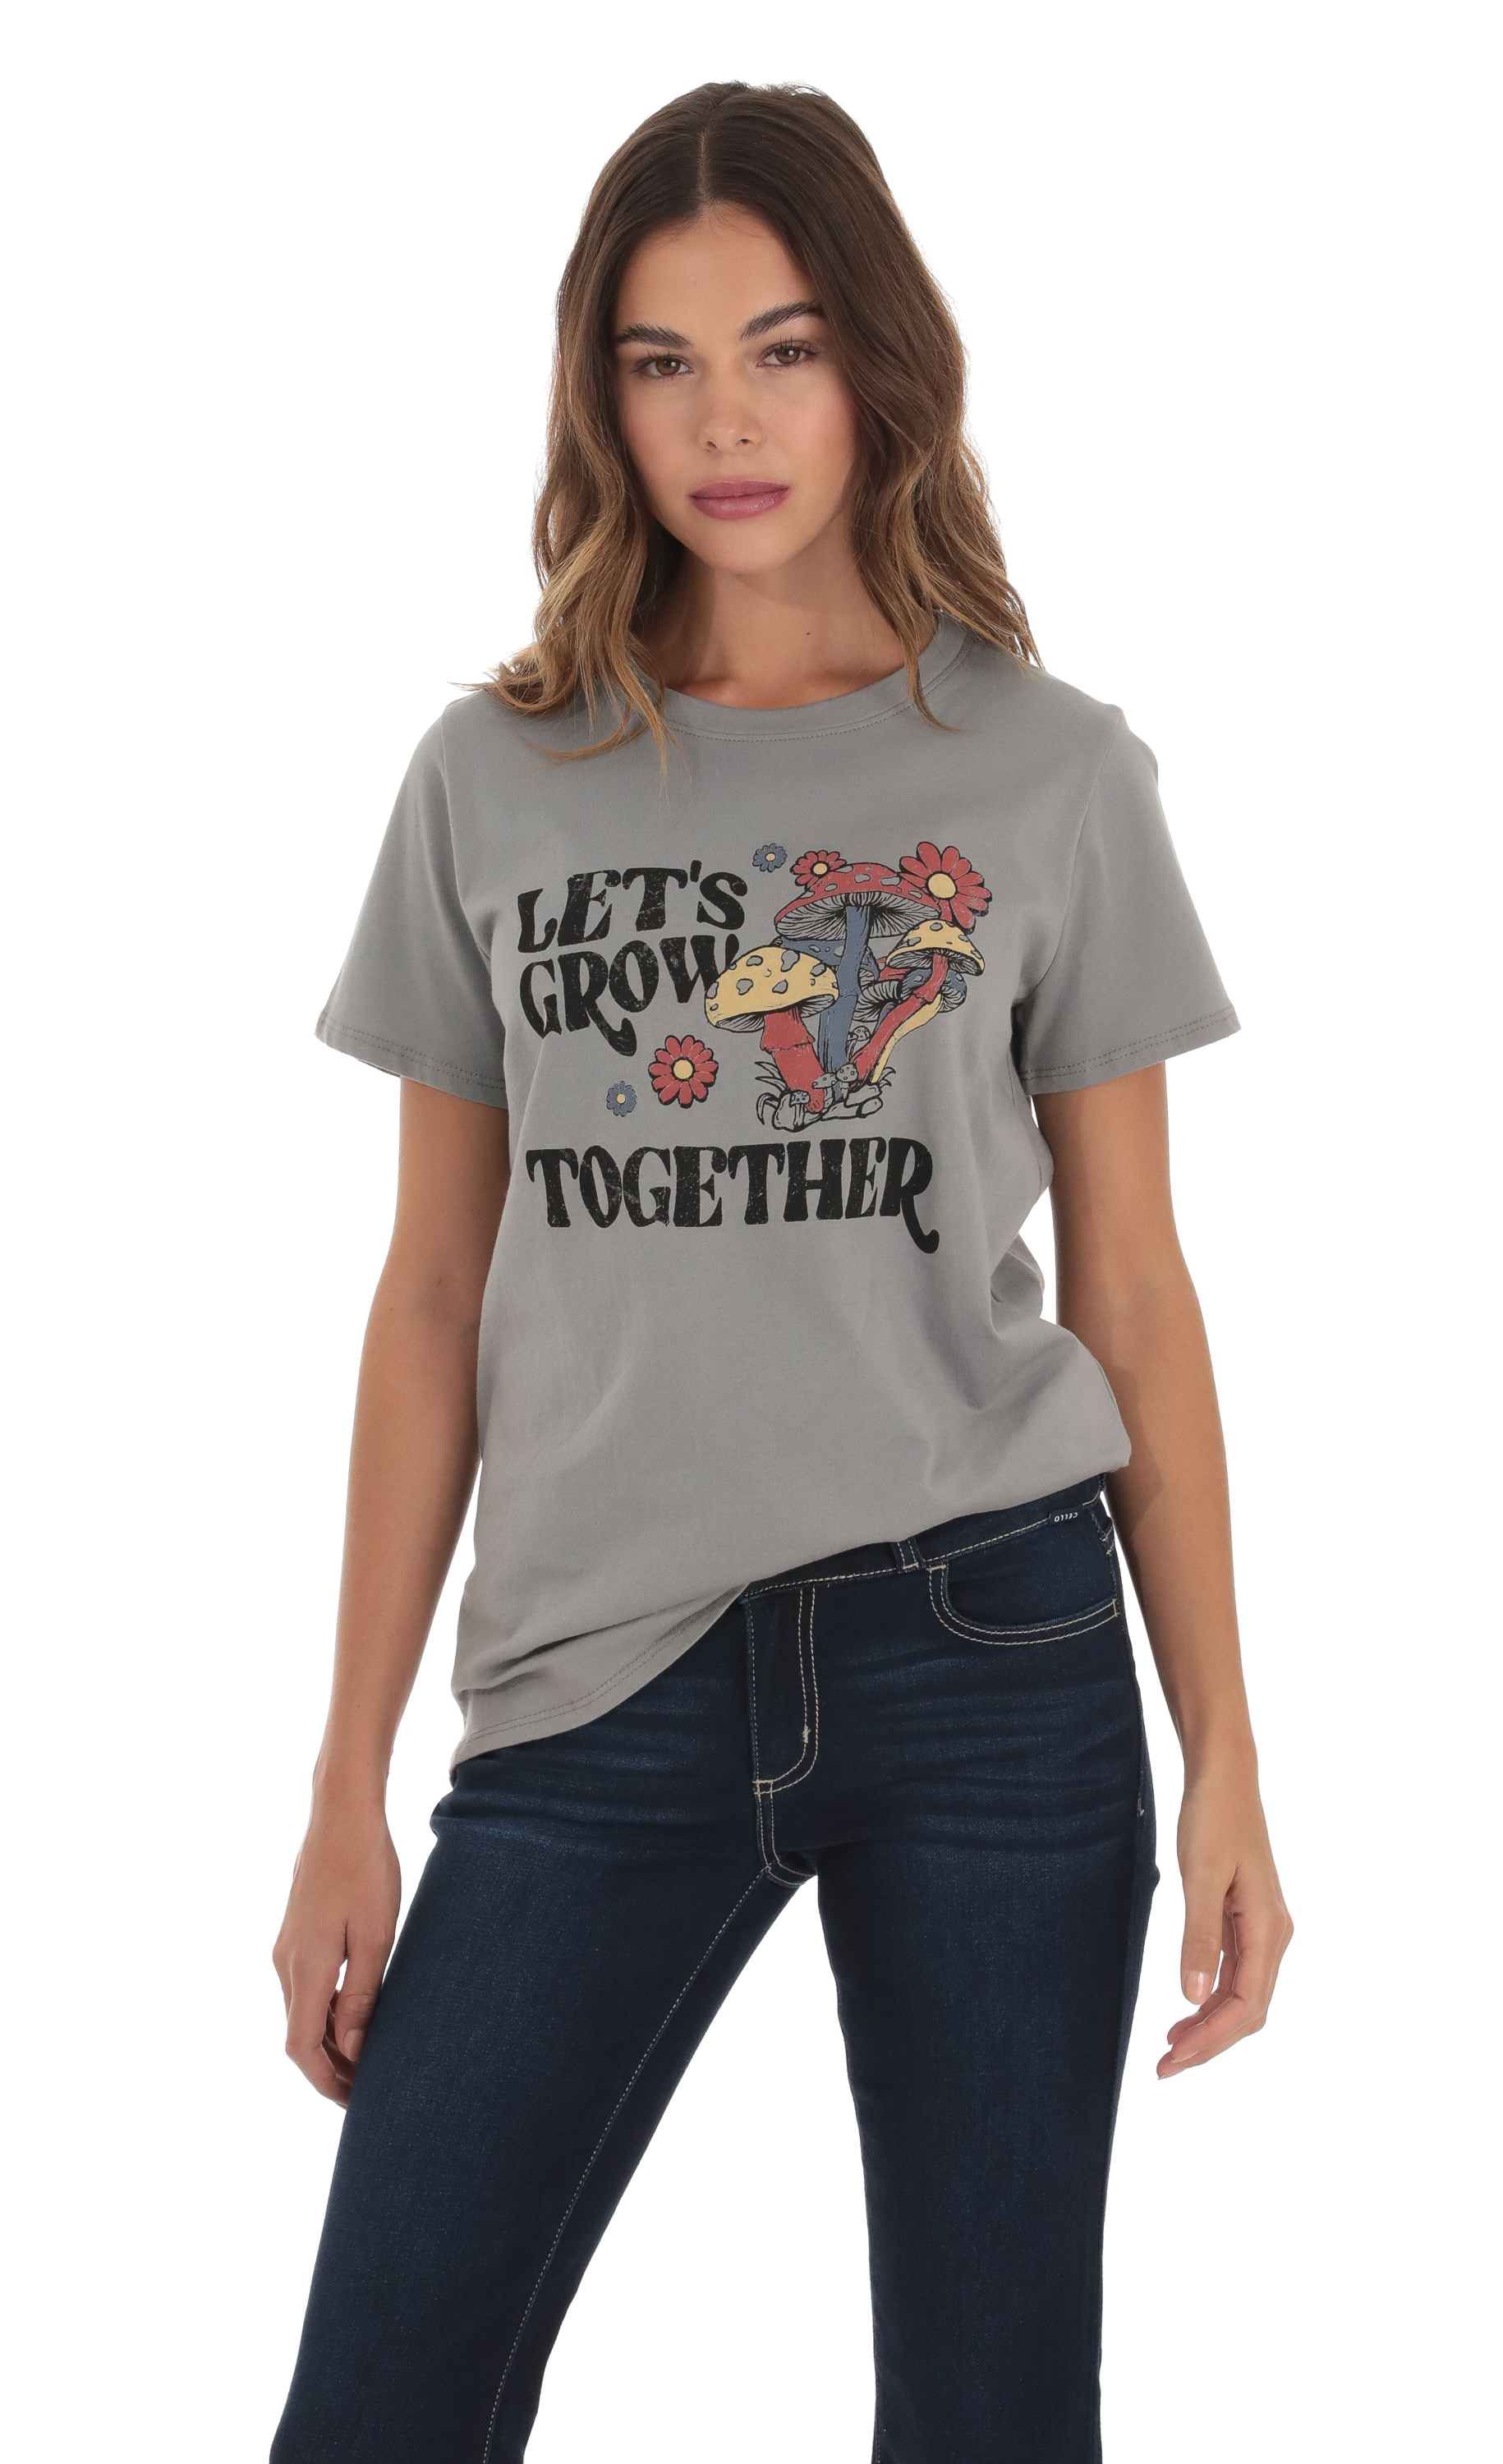 Lets Grow Together T-Shirt